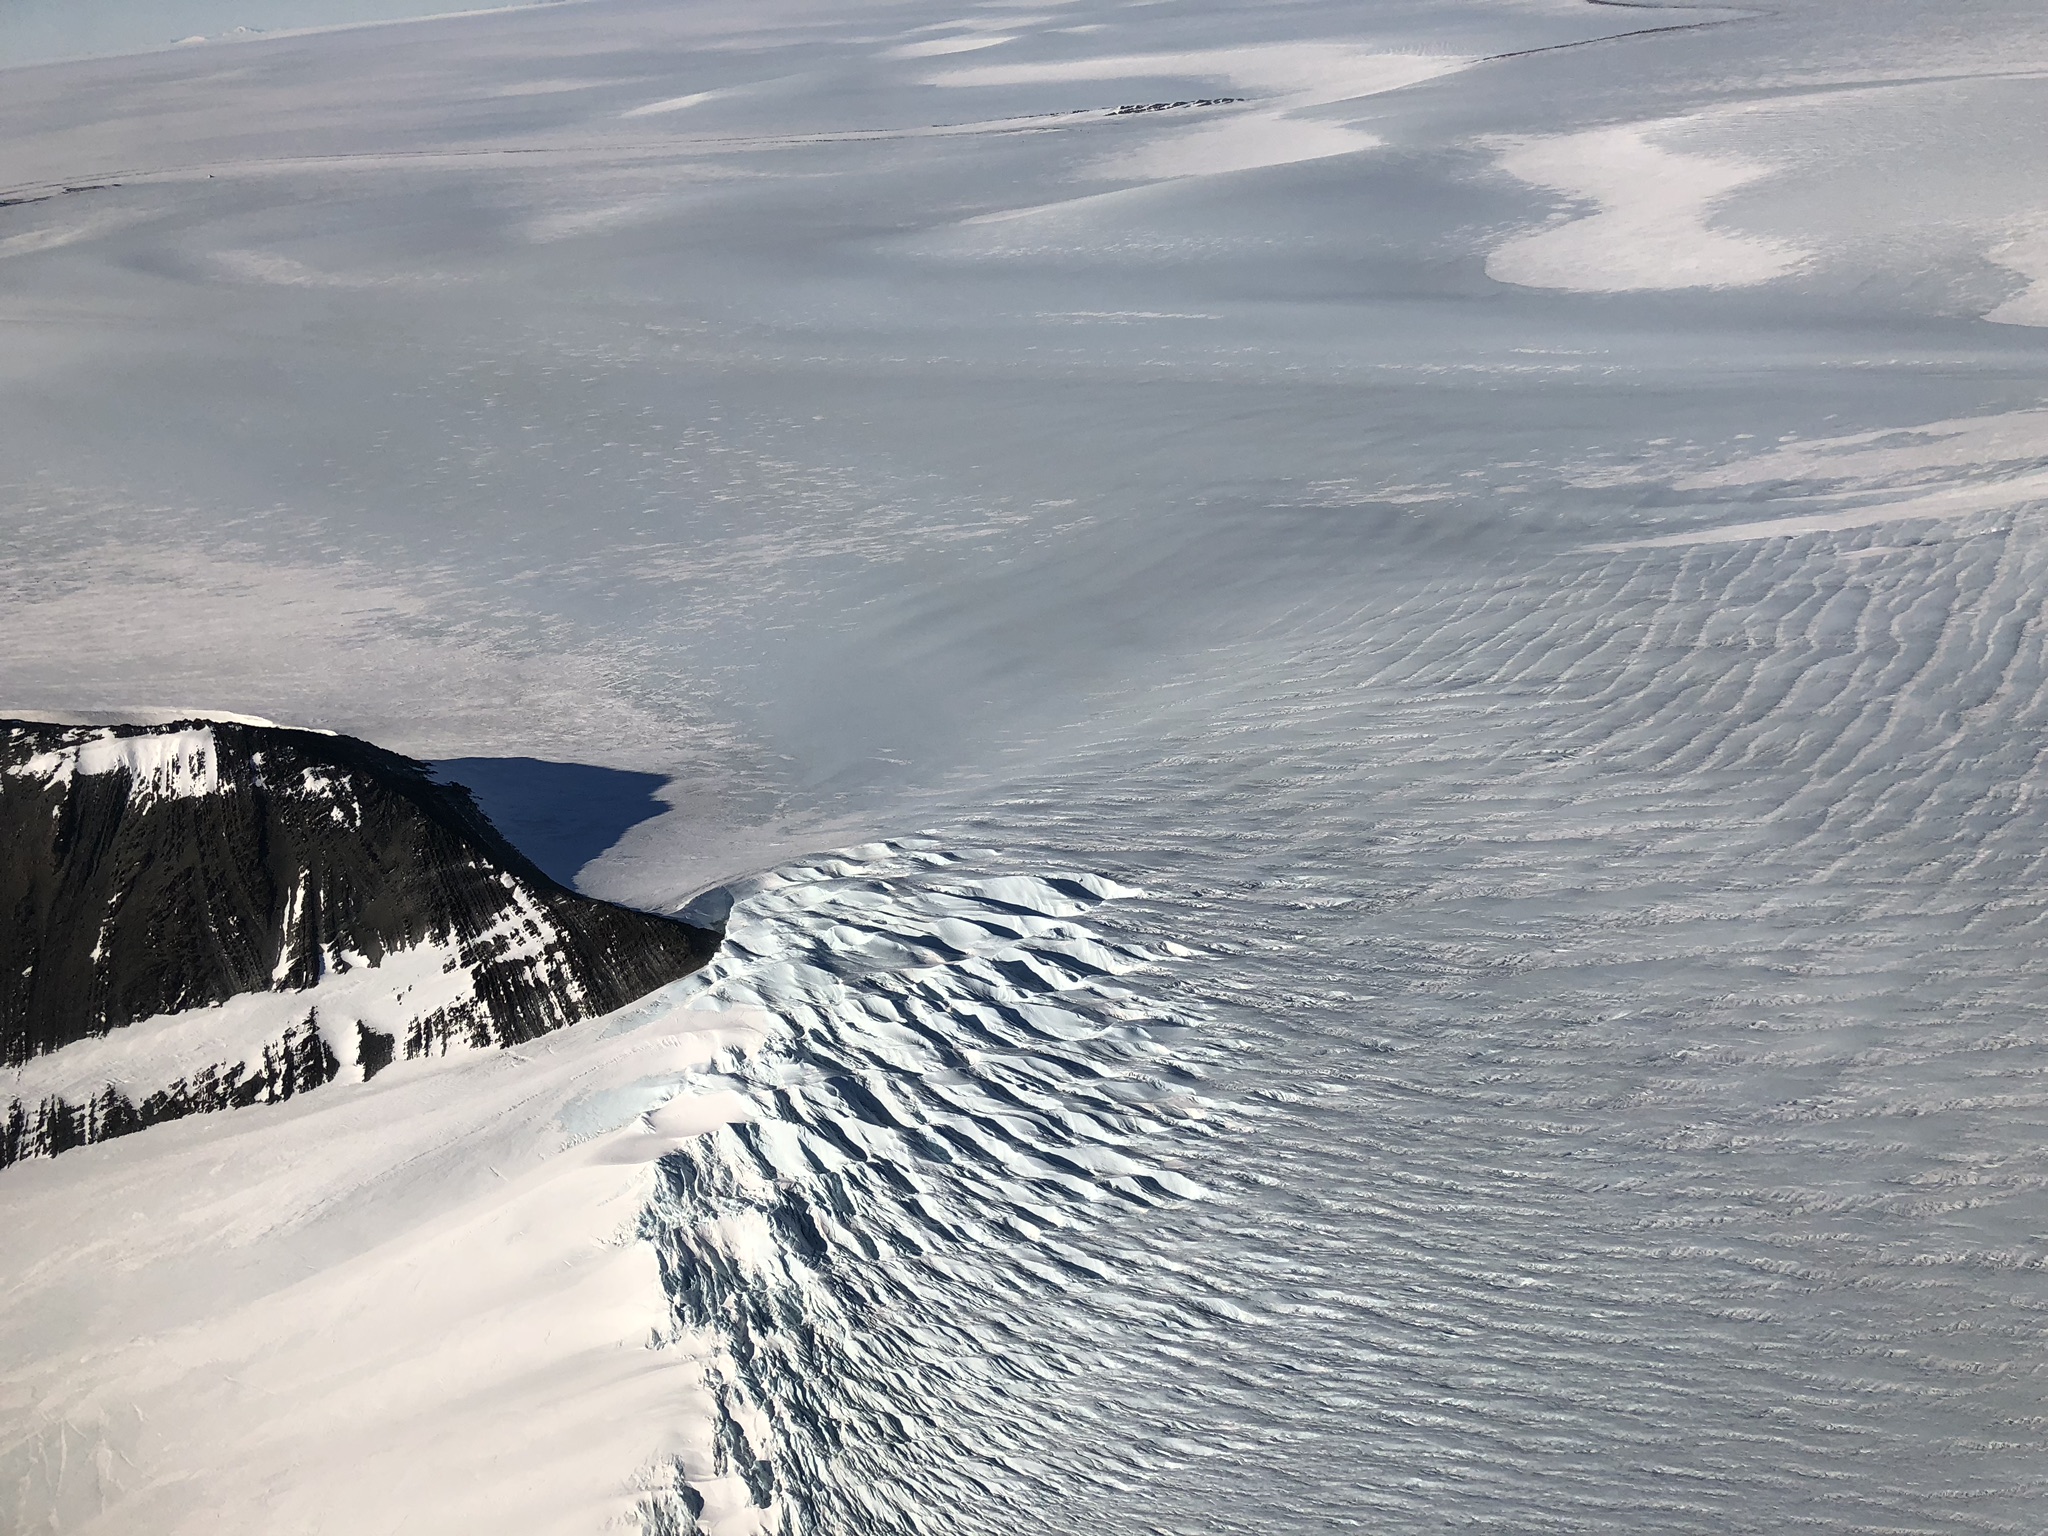 A photograph of crevasses forming as ice flows around an Antarctic mountain. The crevasses look like bumpy, light blue frosting, which meets with smoother, white ice in the left third of the picture.